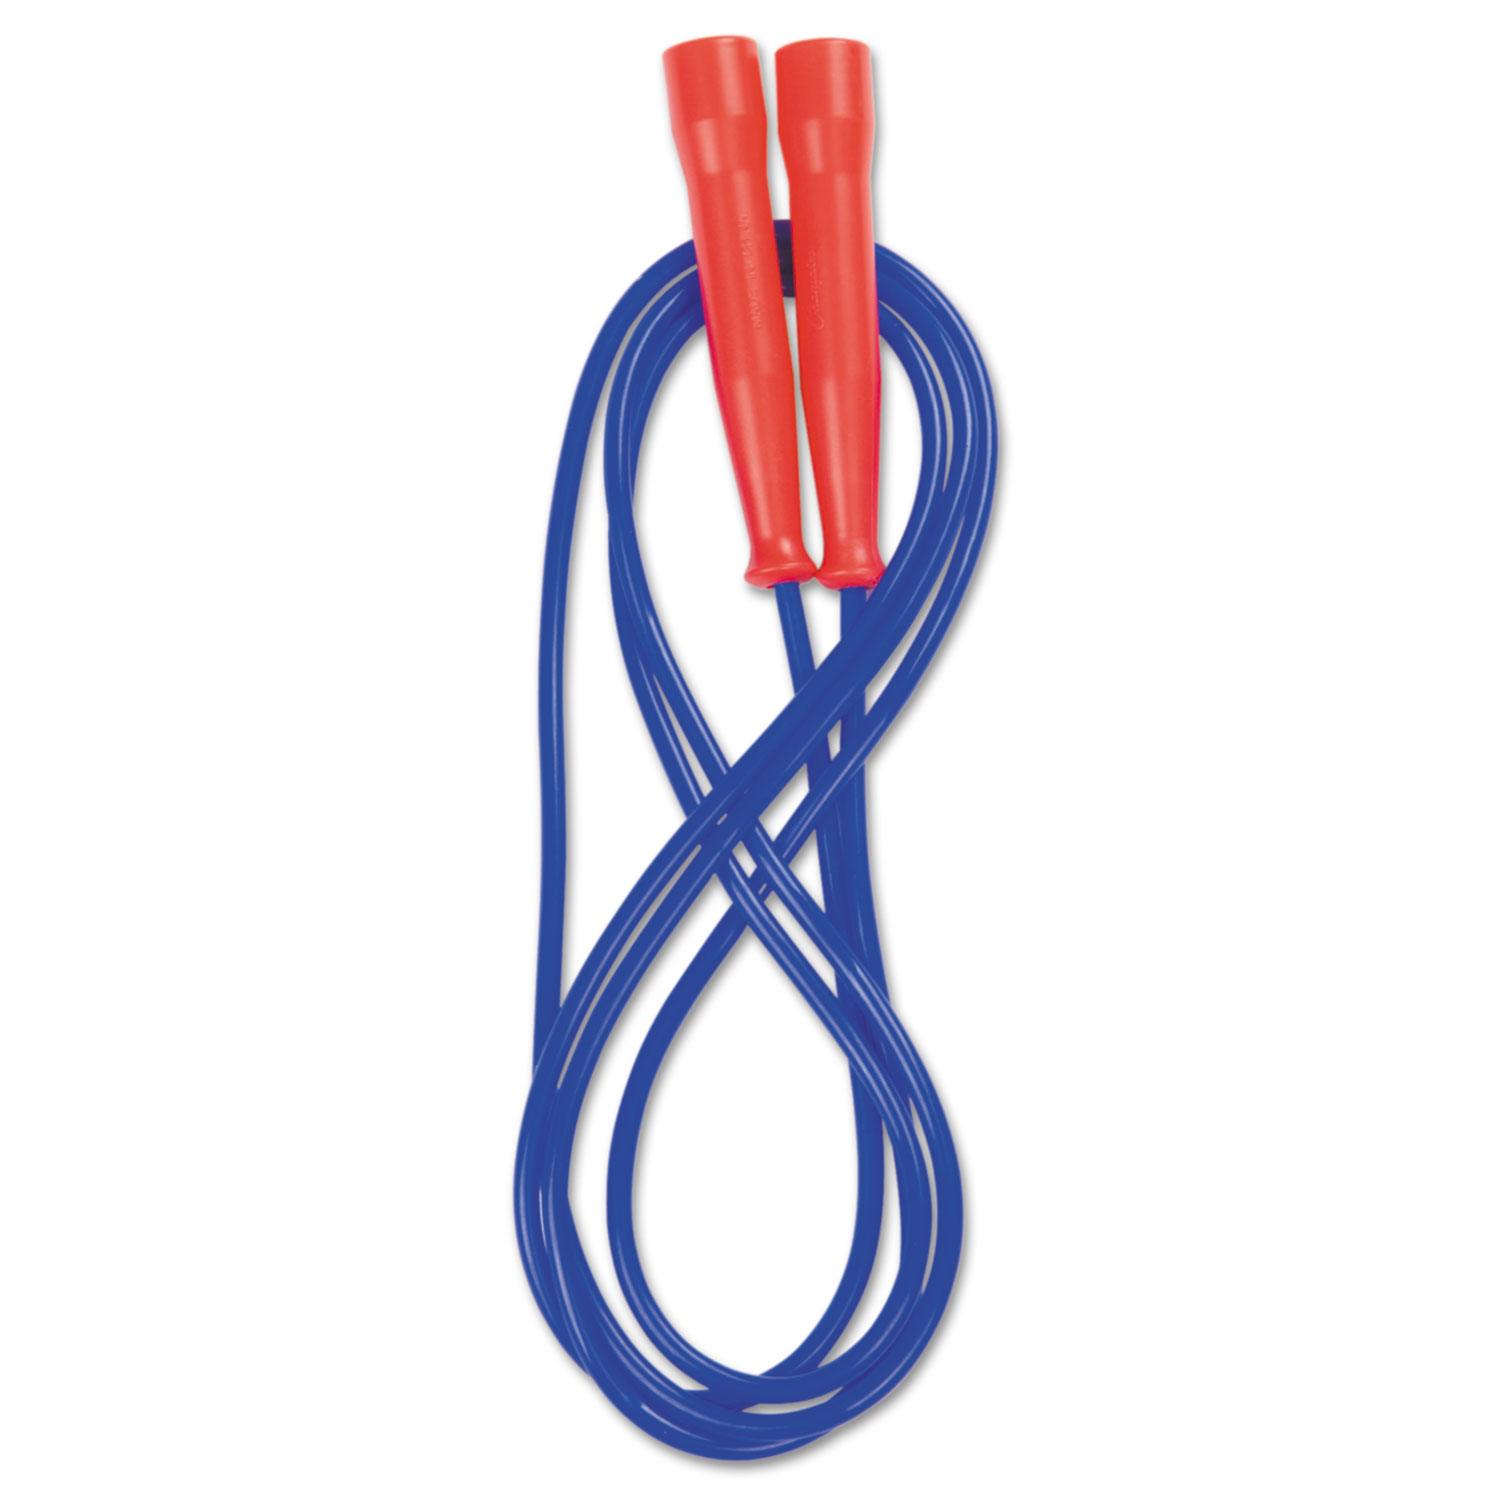 Licorice Speed Rope, 7 ft, Red Handle